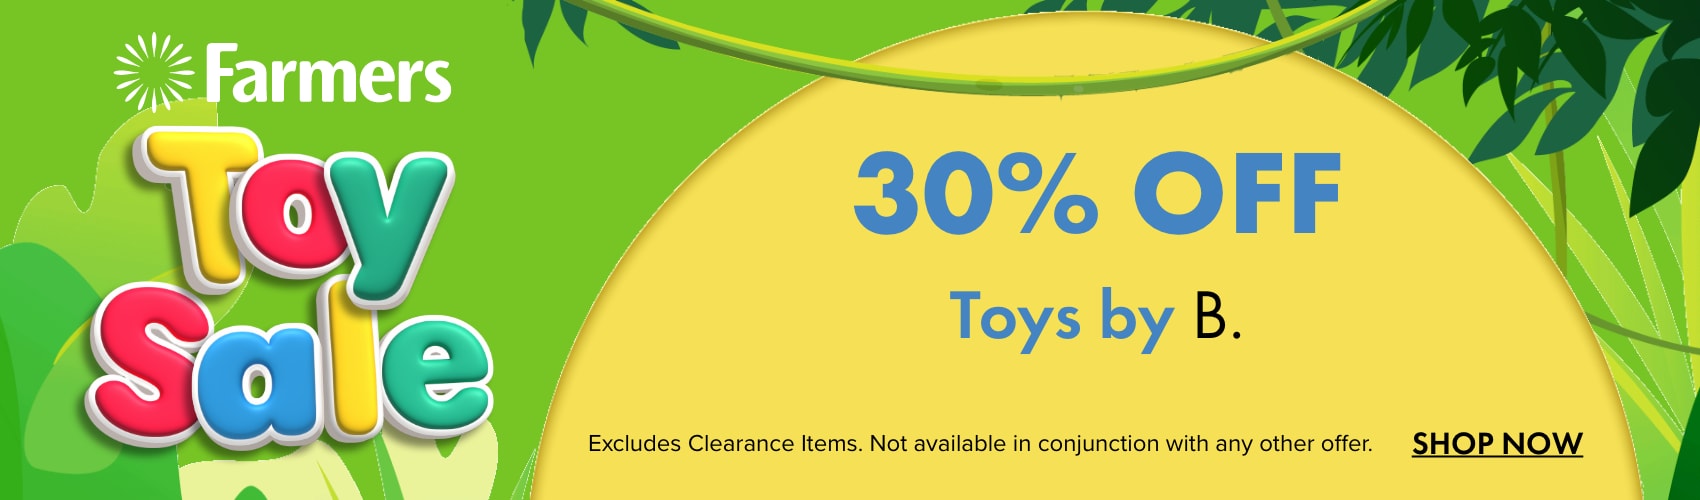 30% OFF Toys by B.